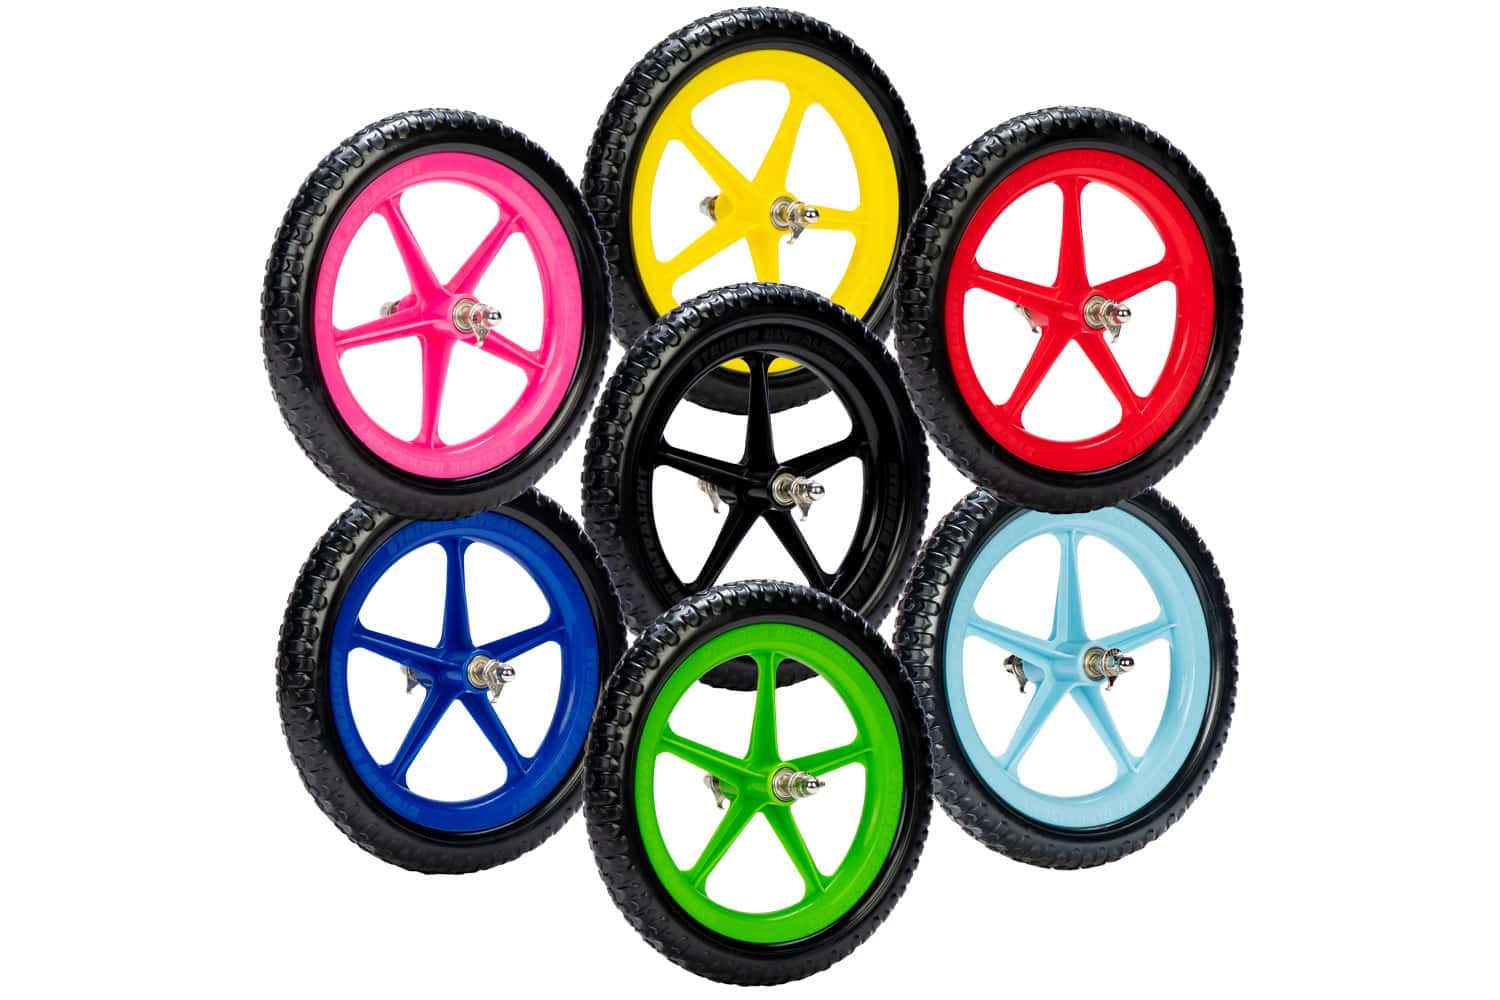 Studio details of all colors of Strider Ultralight Wheels